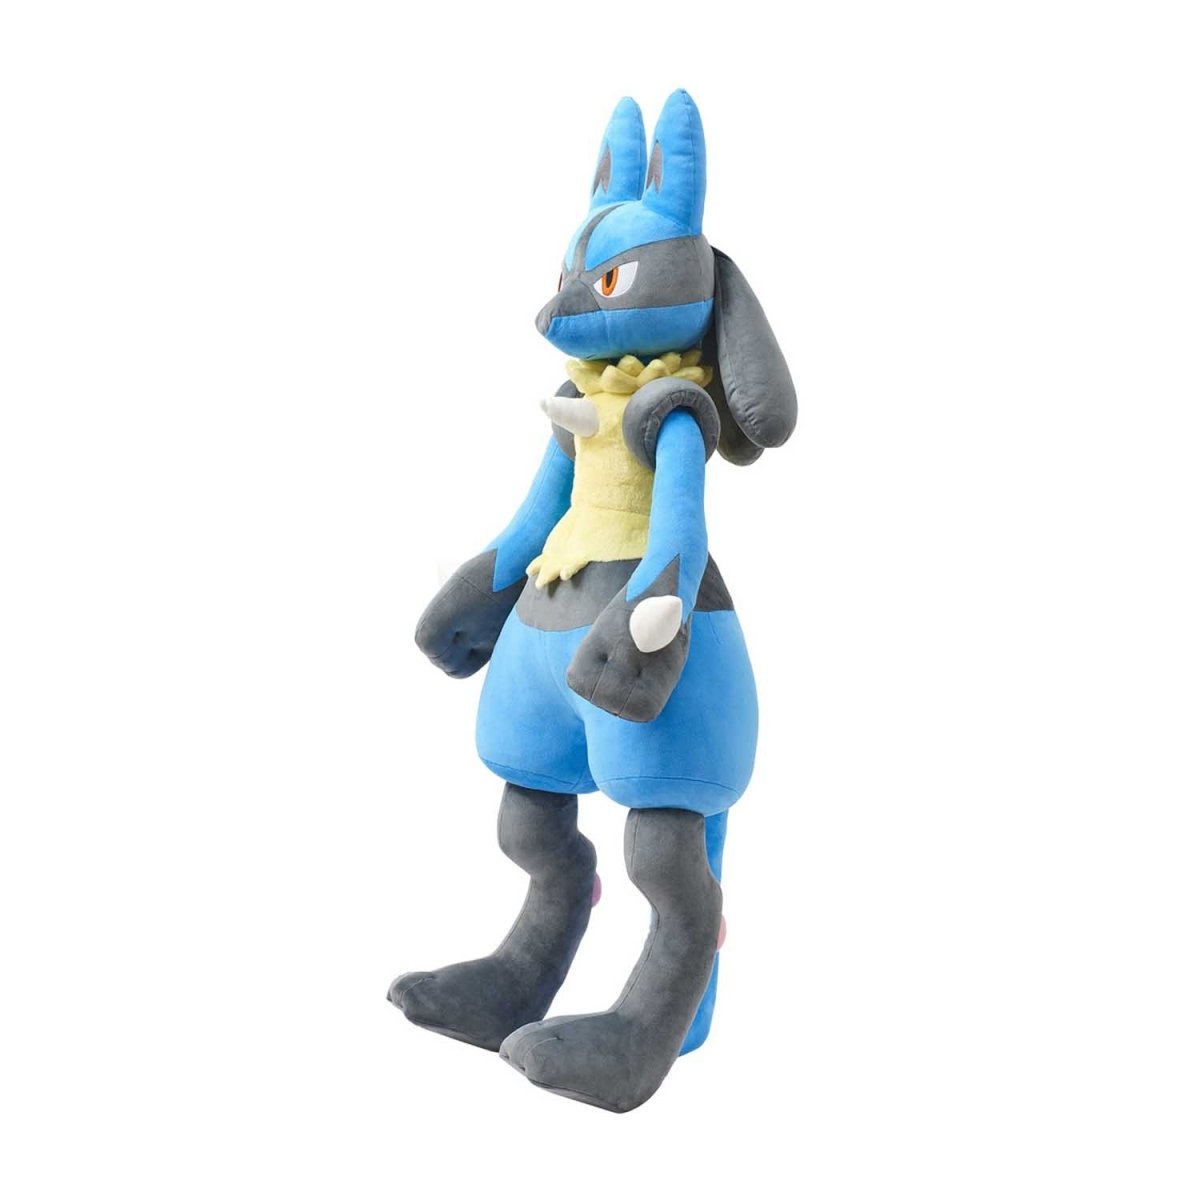 Pokemon: 10 Things You Didn't Know About Lucario